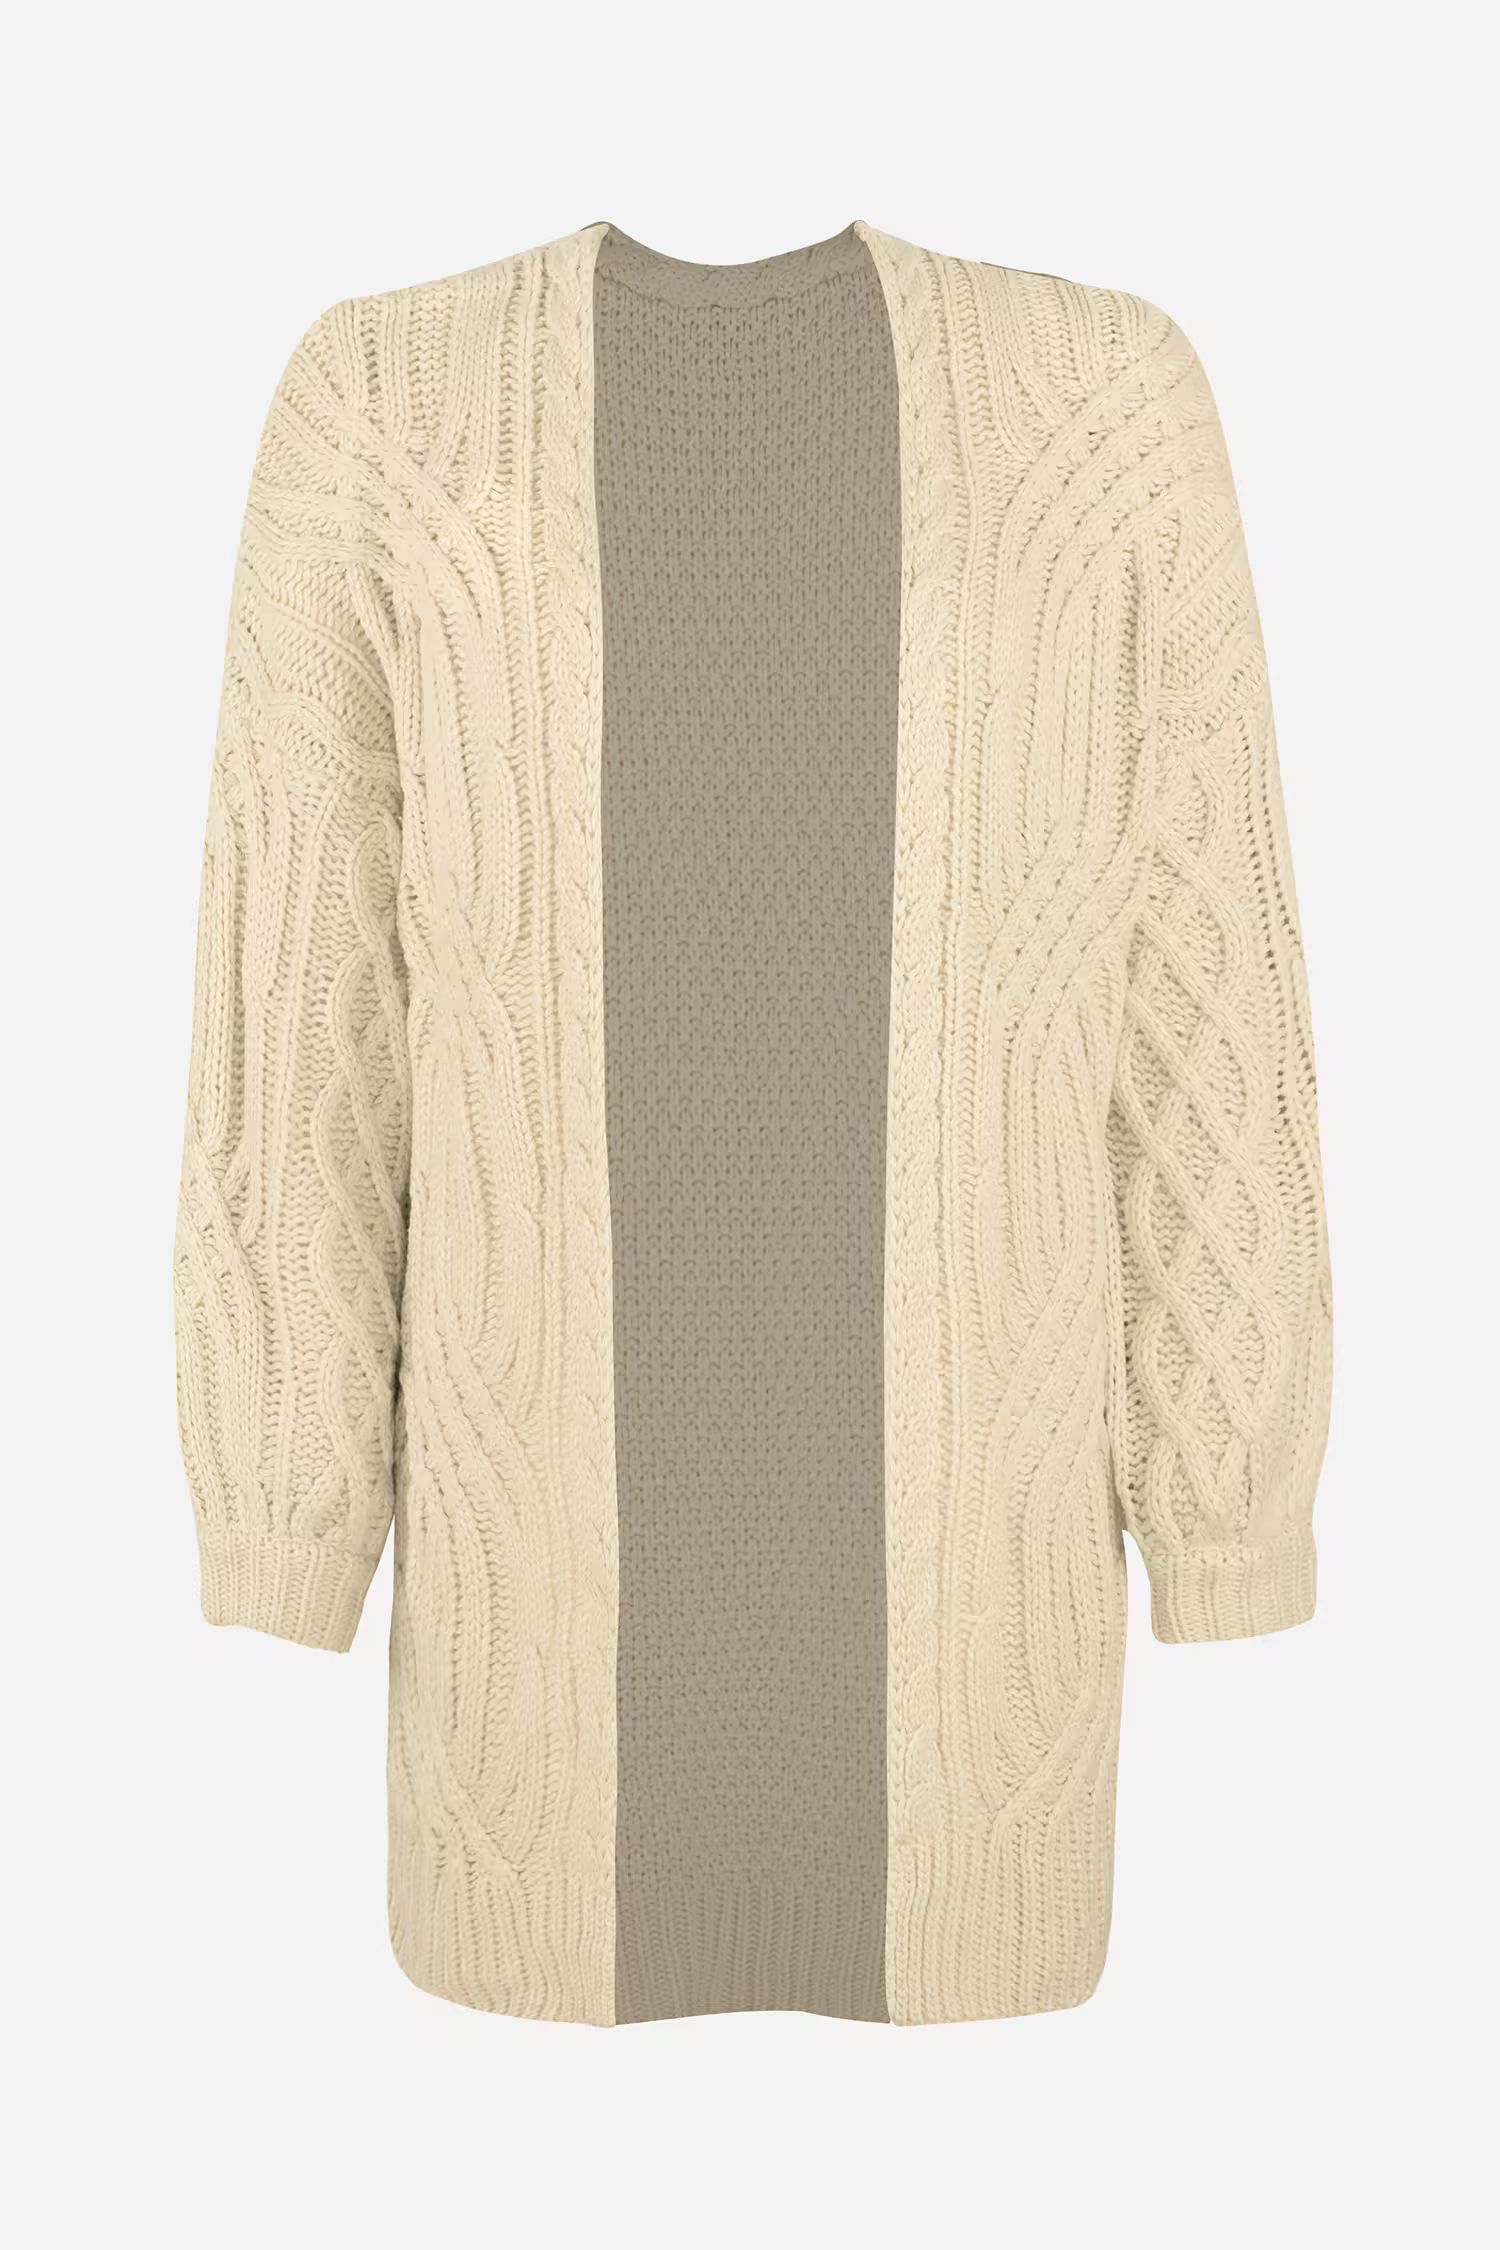 X Savannah Autumn Leaves Cable Knit CardiganNew | Cupshe US